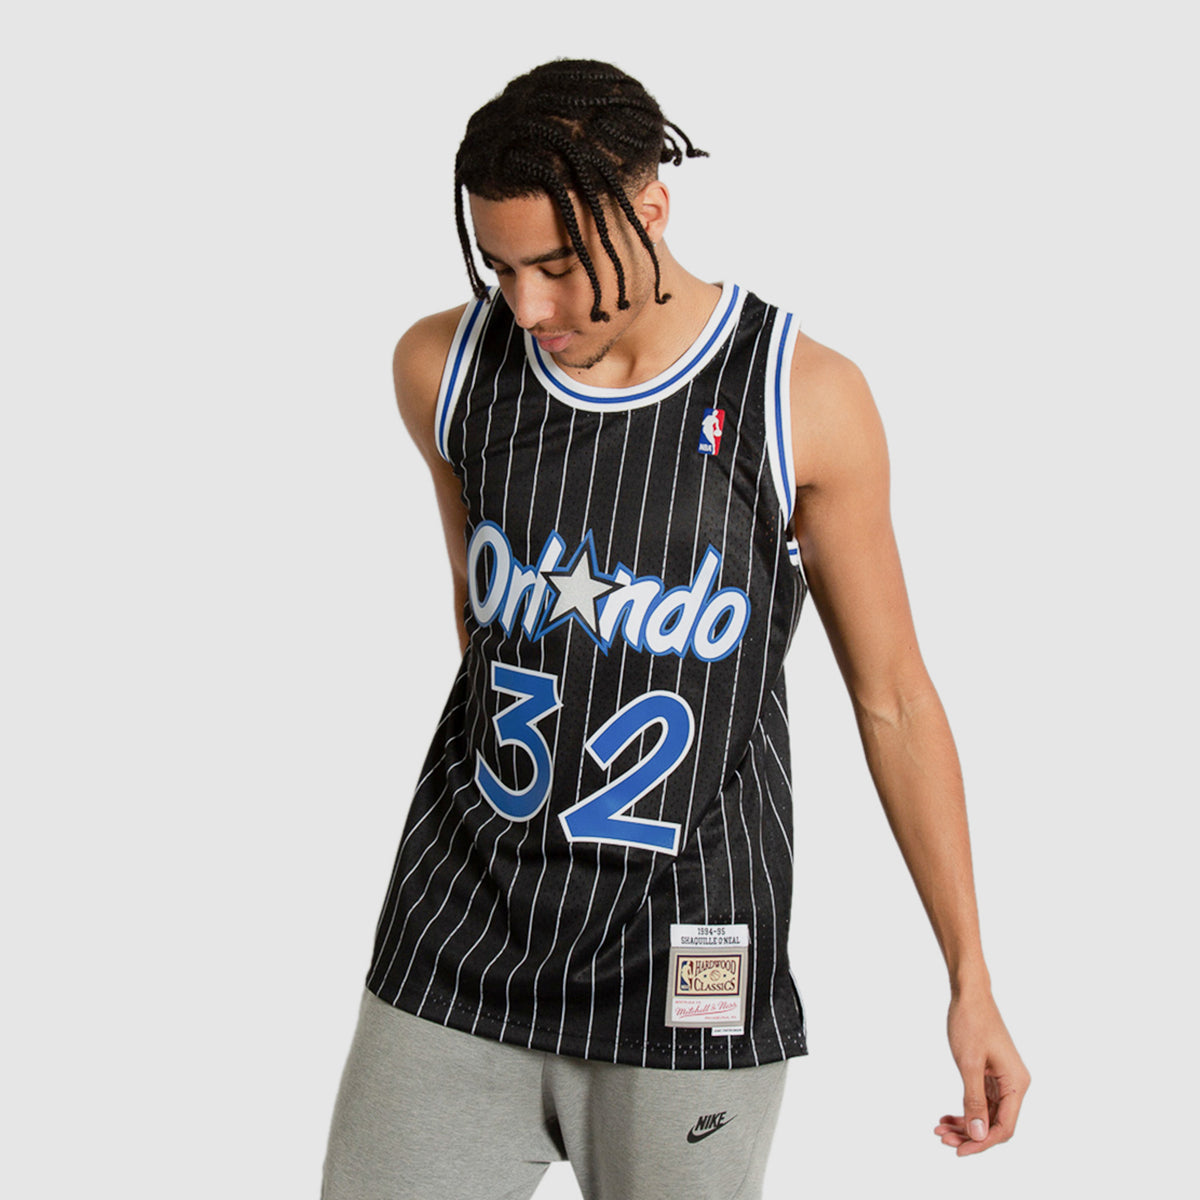 Mitchell and ness Shaquille O'Neal 1994-95 Jersey Orlando Magic